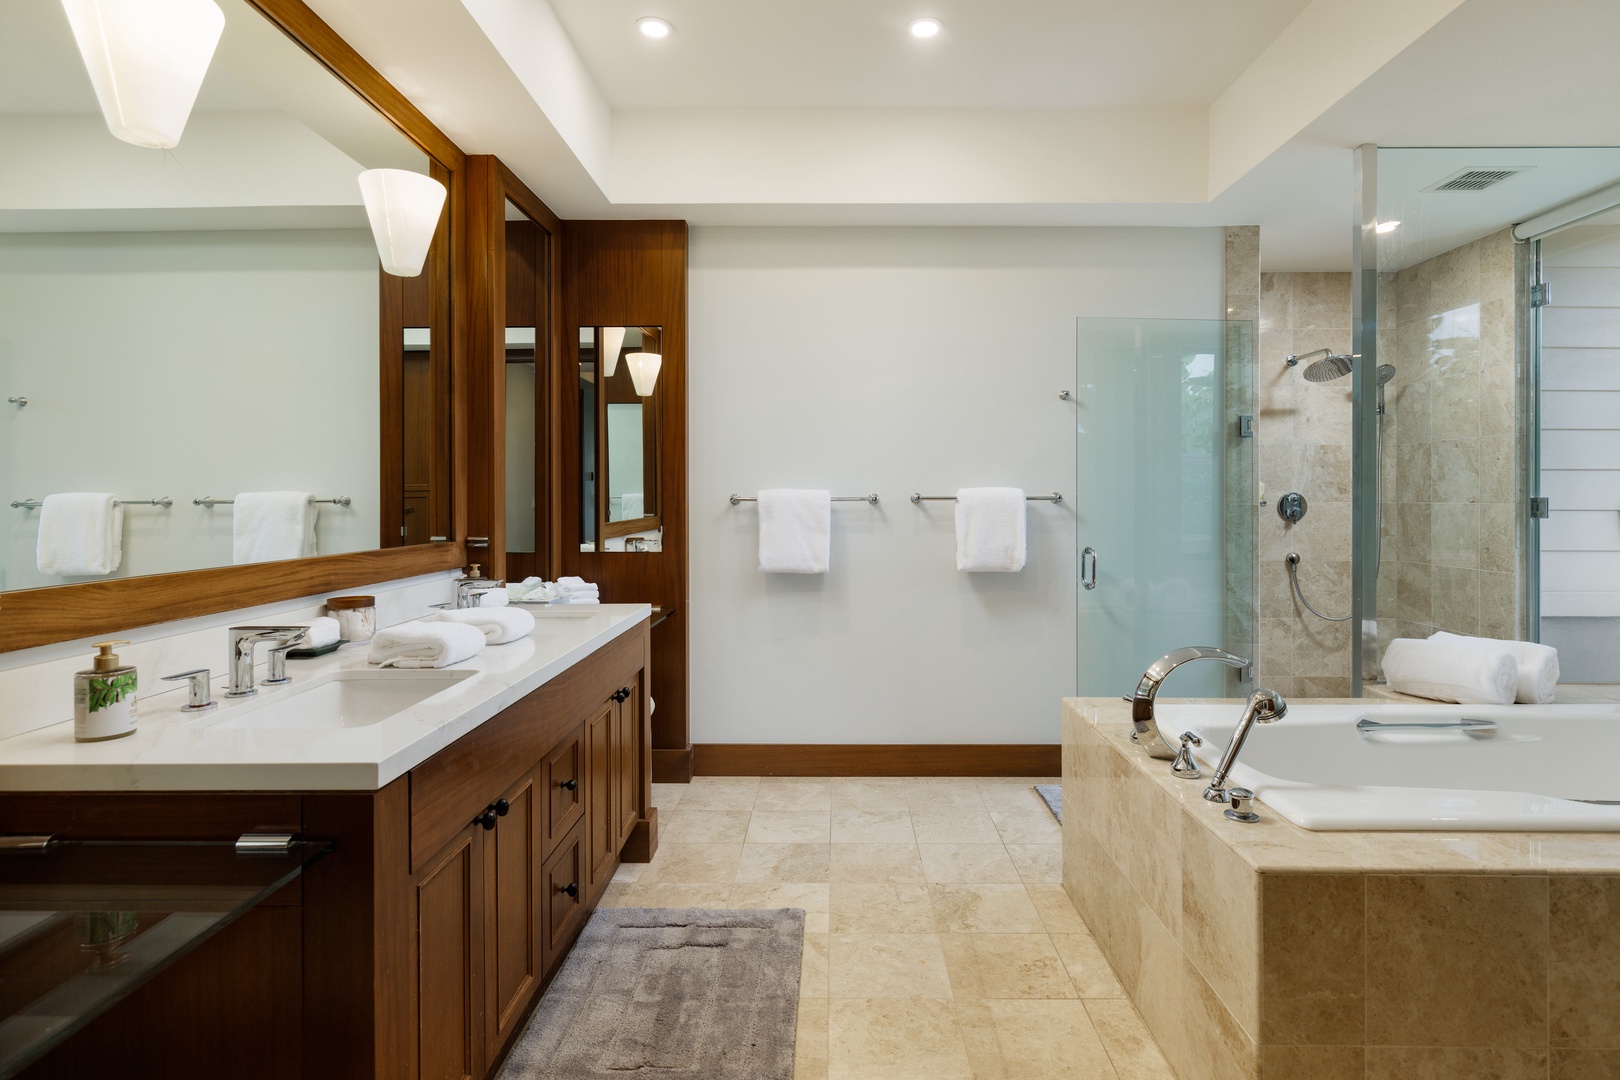 Kailua Kona Vacation Rentals, 3BD Fairways Villa (104A) at Four Seasons Resort at Hualalai - Wide and roomy ensuite with dual vanity spaces.